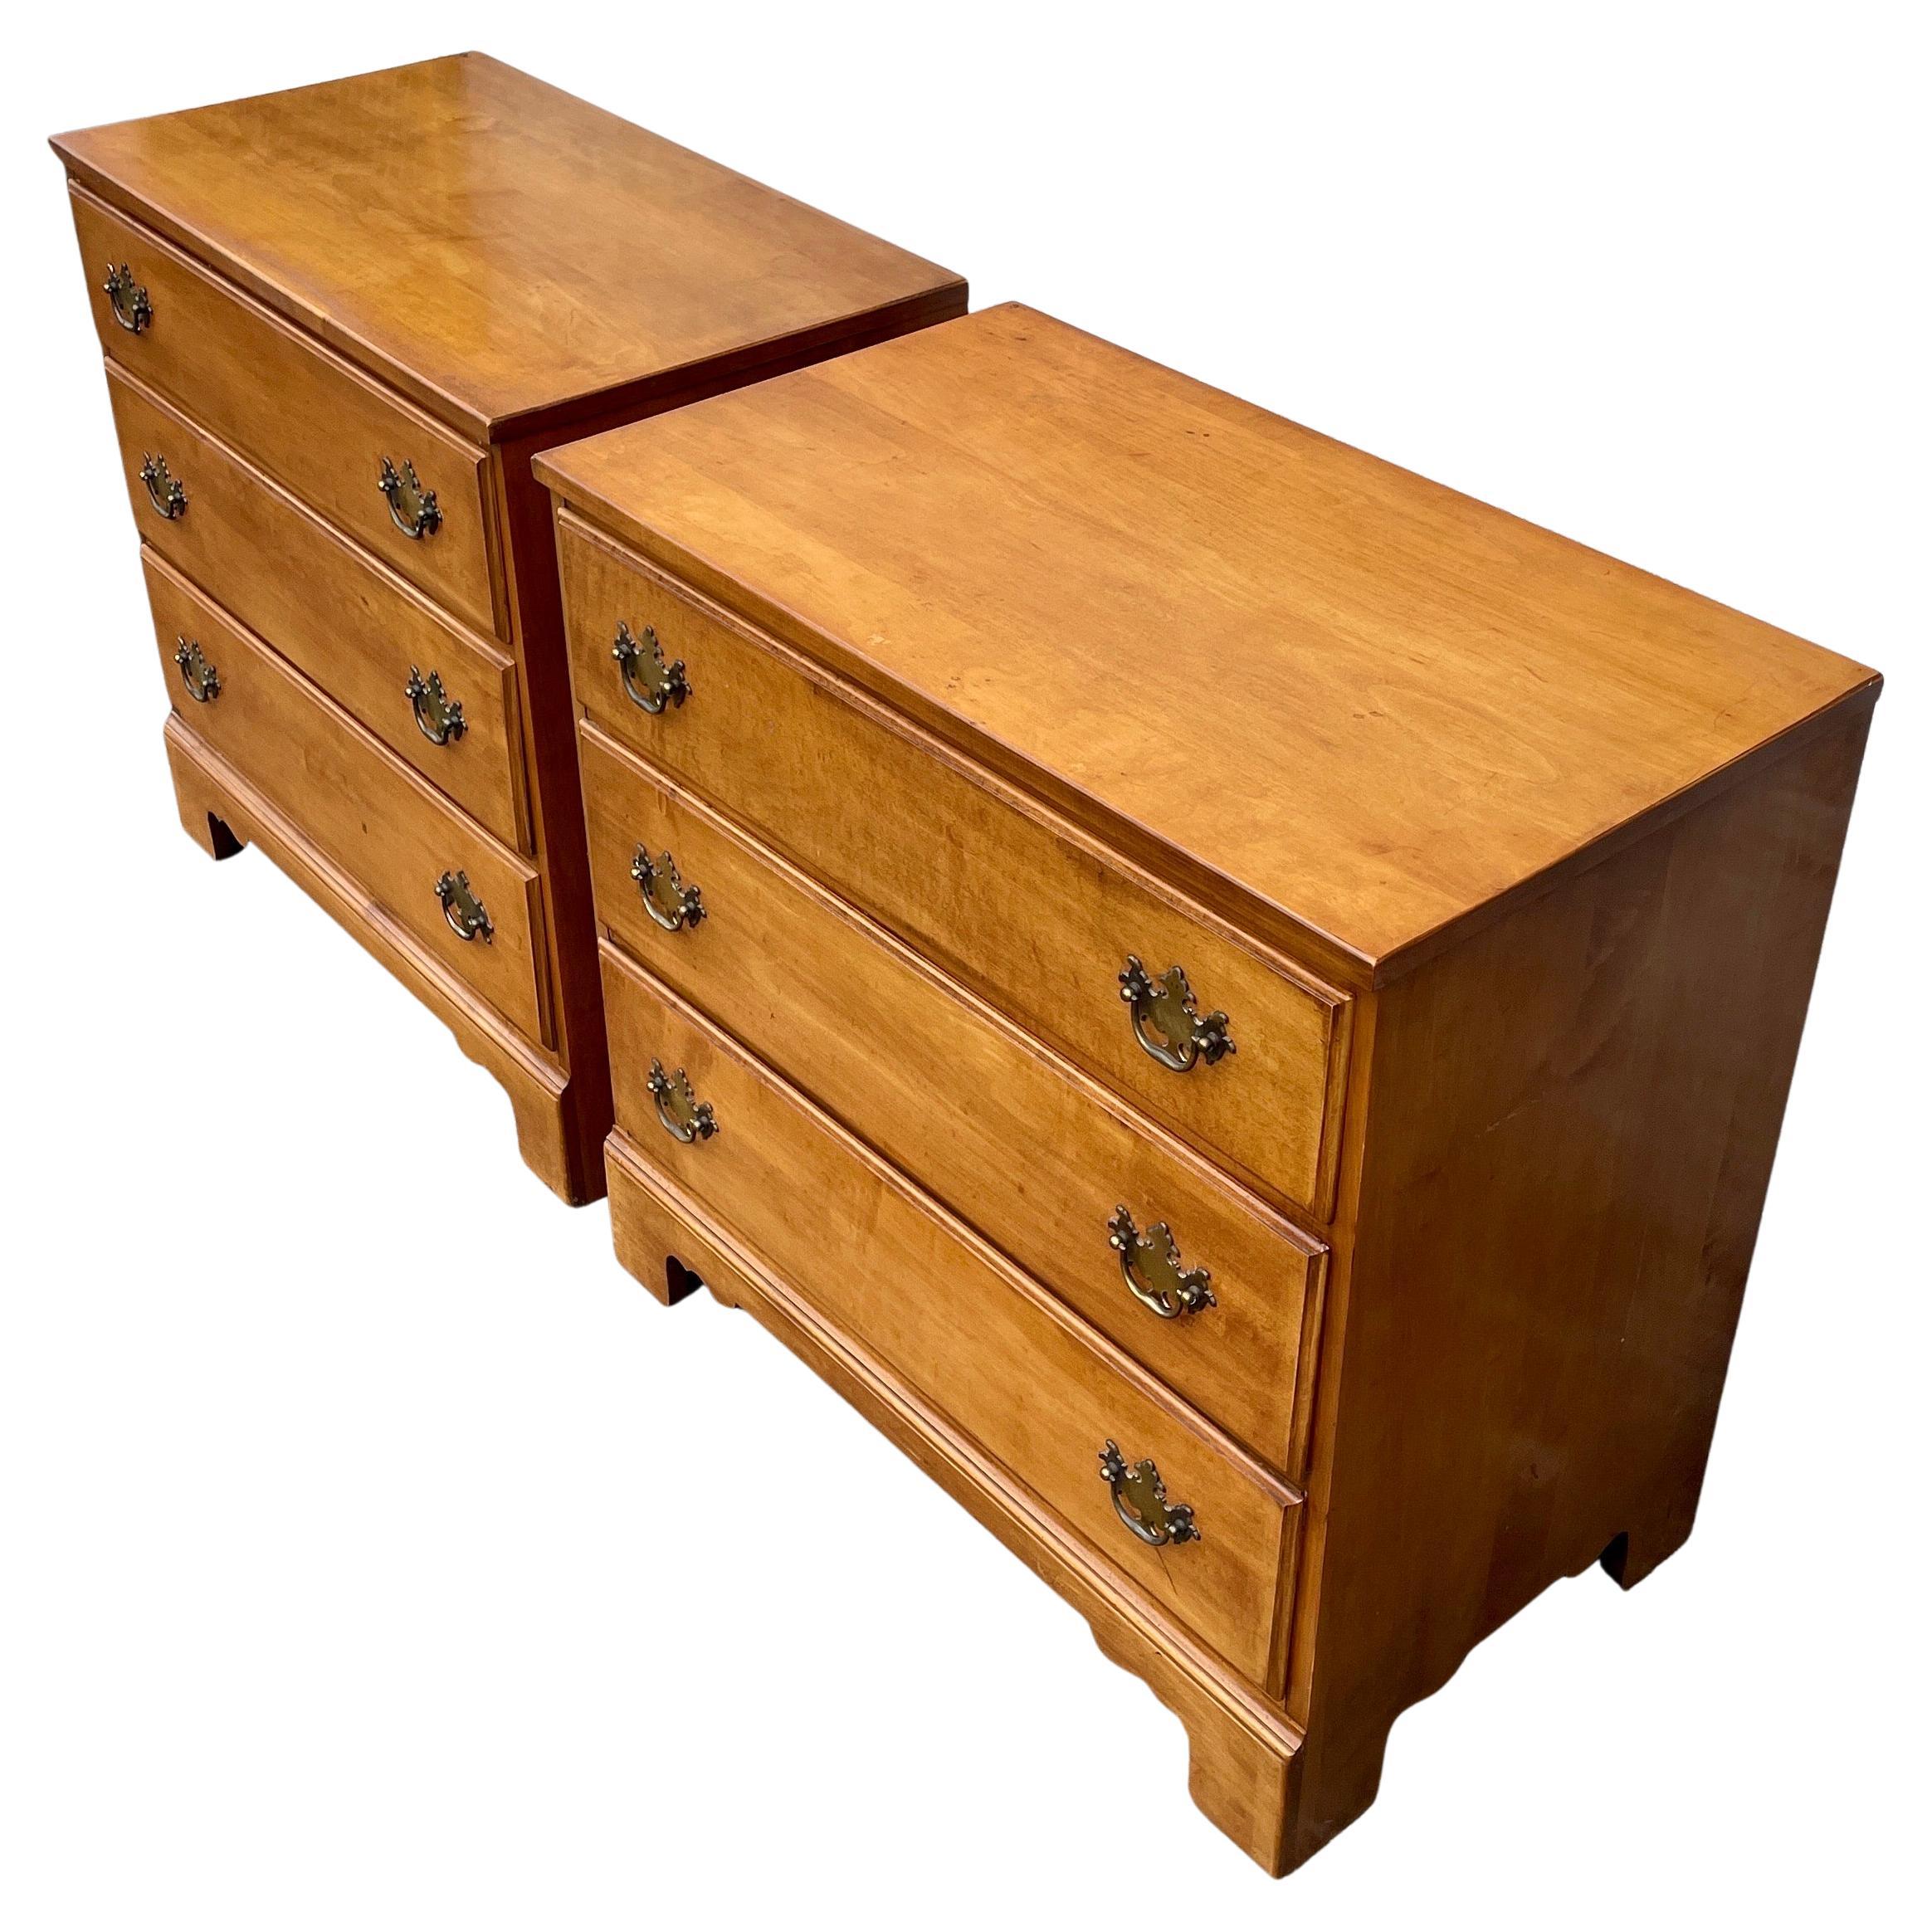 20th Century Pair of 3 Drawer Maplewood Chests of Drawers with Brass Hardware